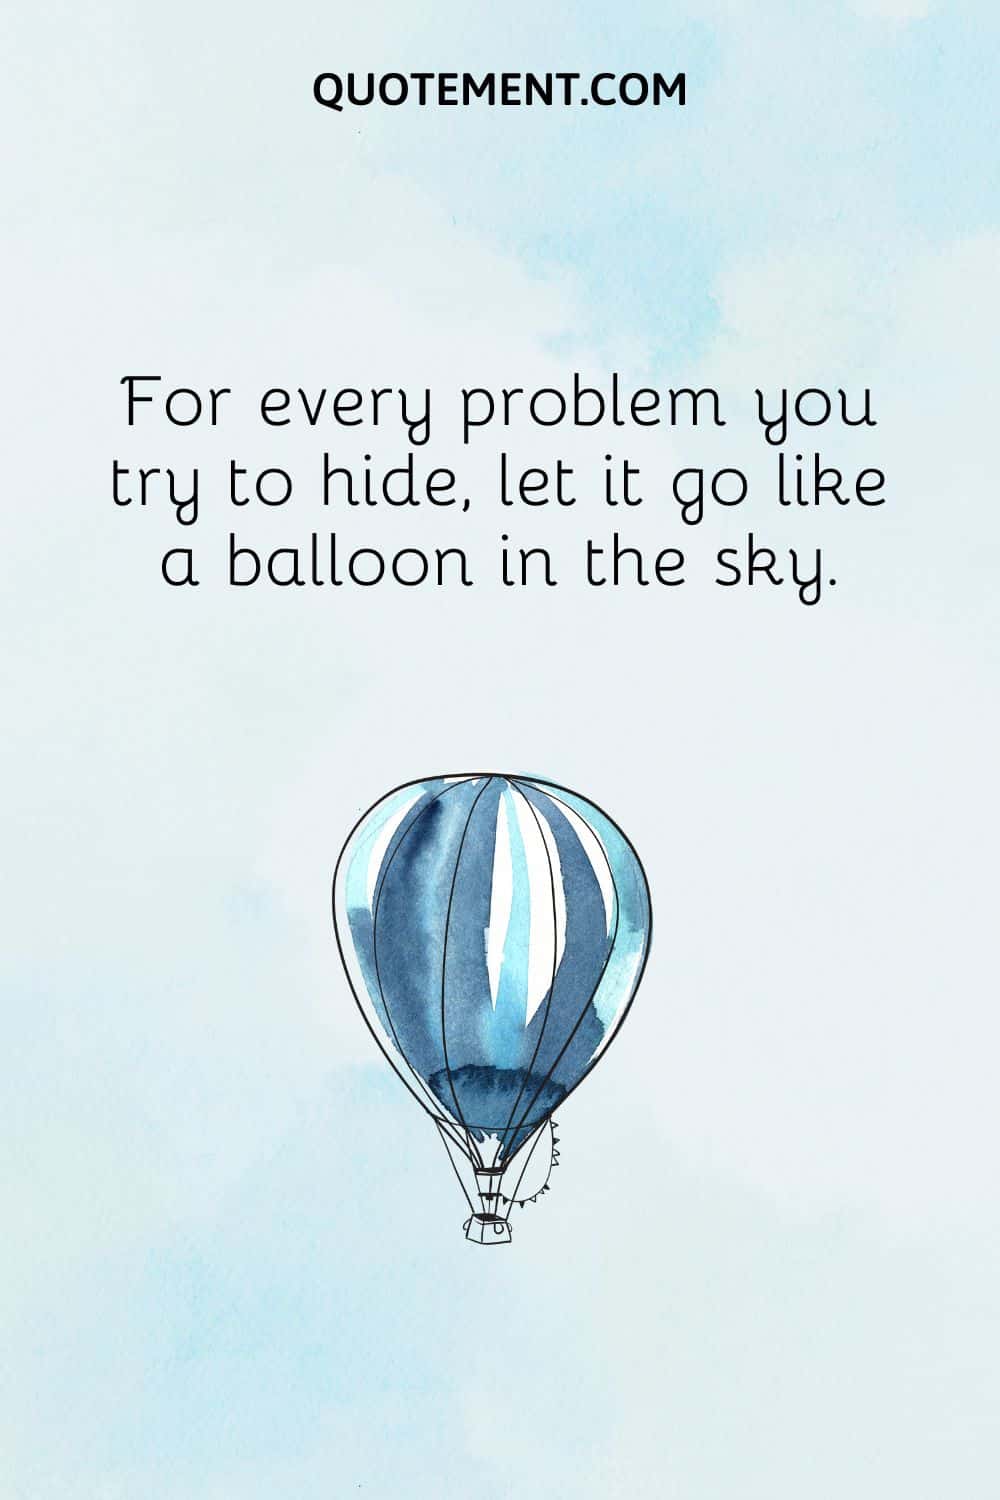 For every problem you try to hide, let it go like a balloon in the sky